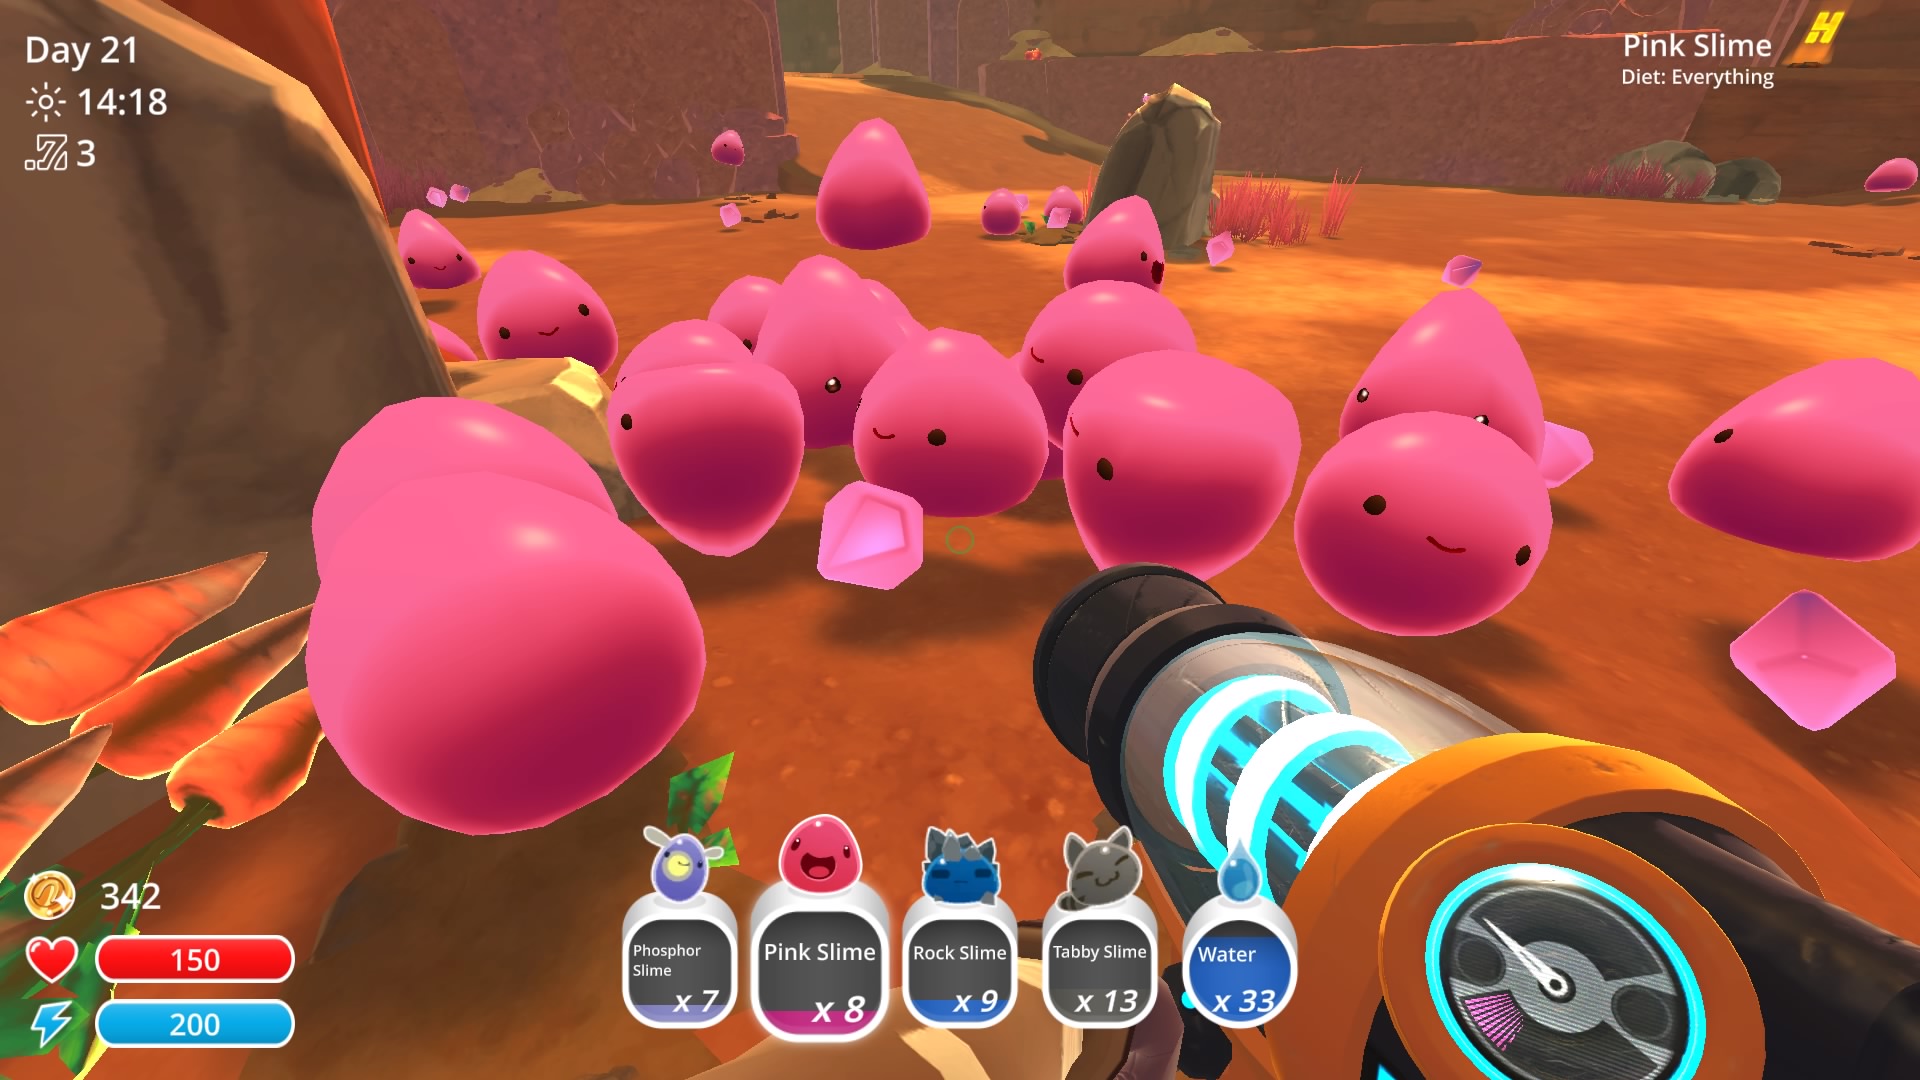 Slime Rancher Review (PS4)